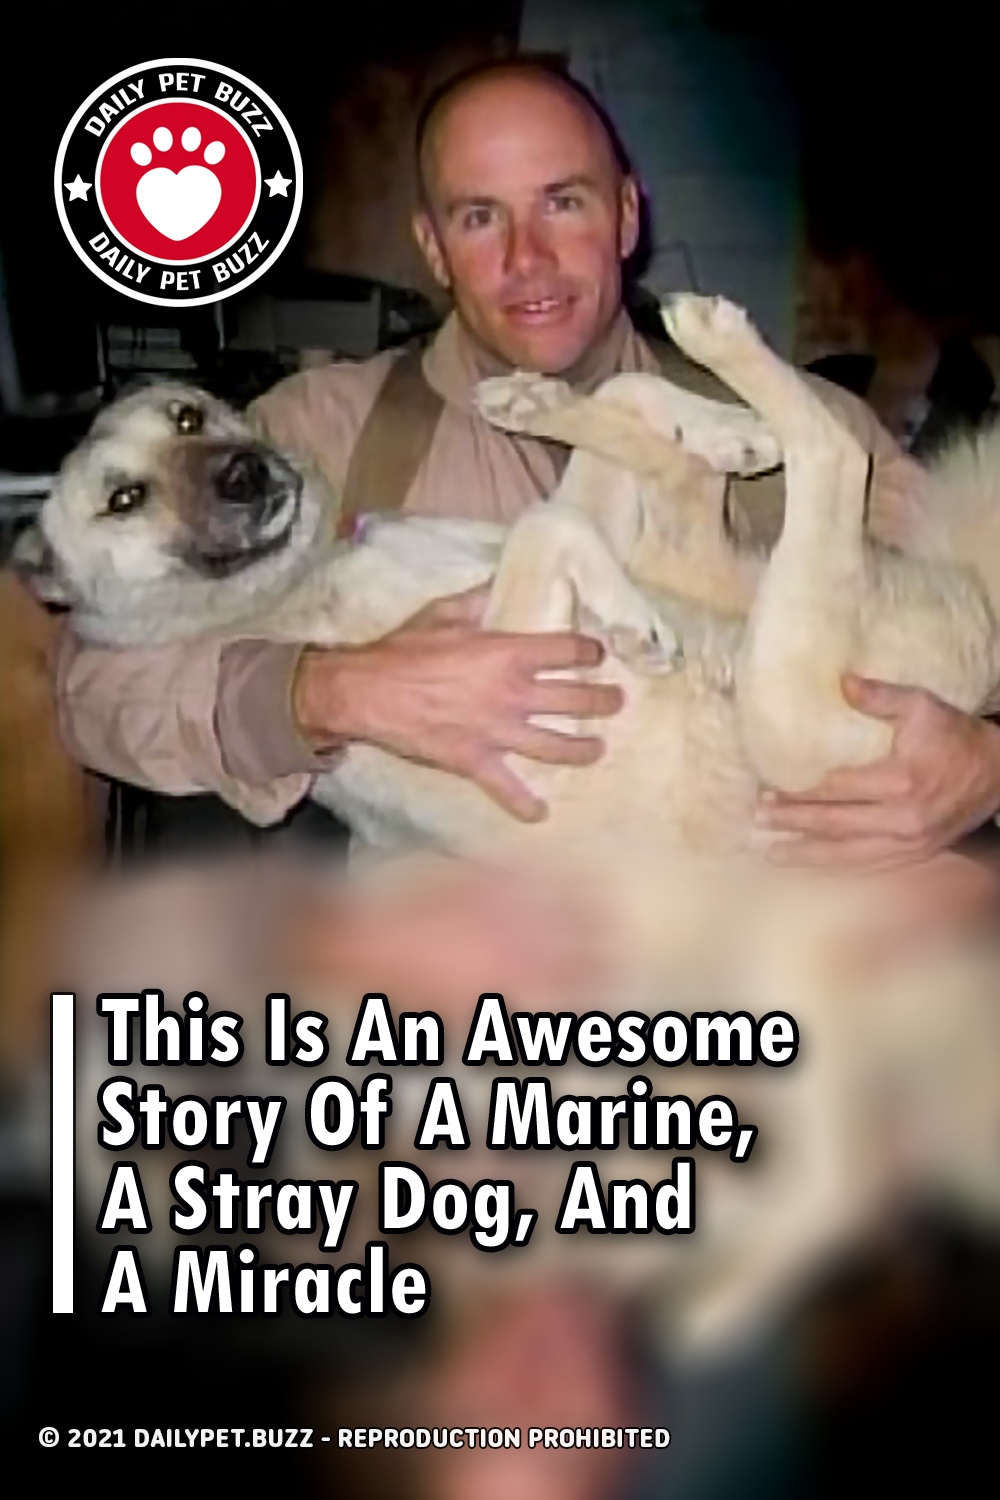 This Is An Awesome Story Of A Marine, A Stray Dog, And A Miracle